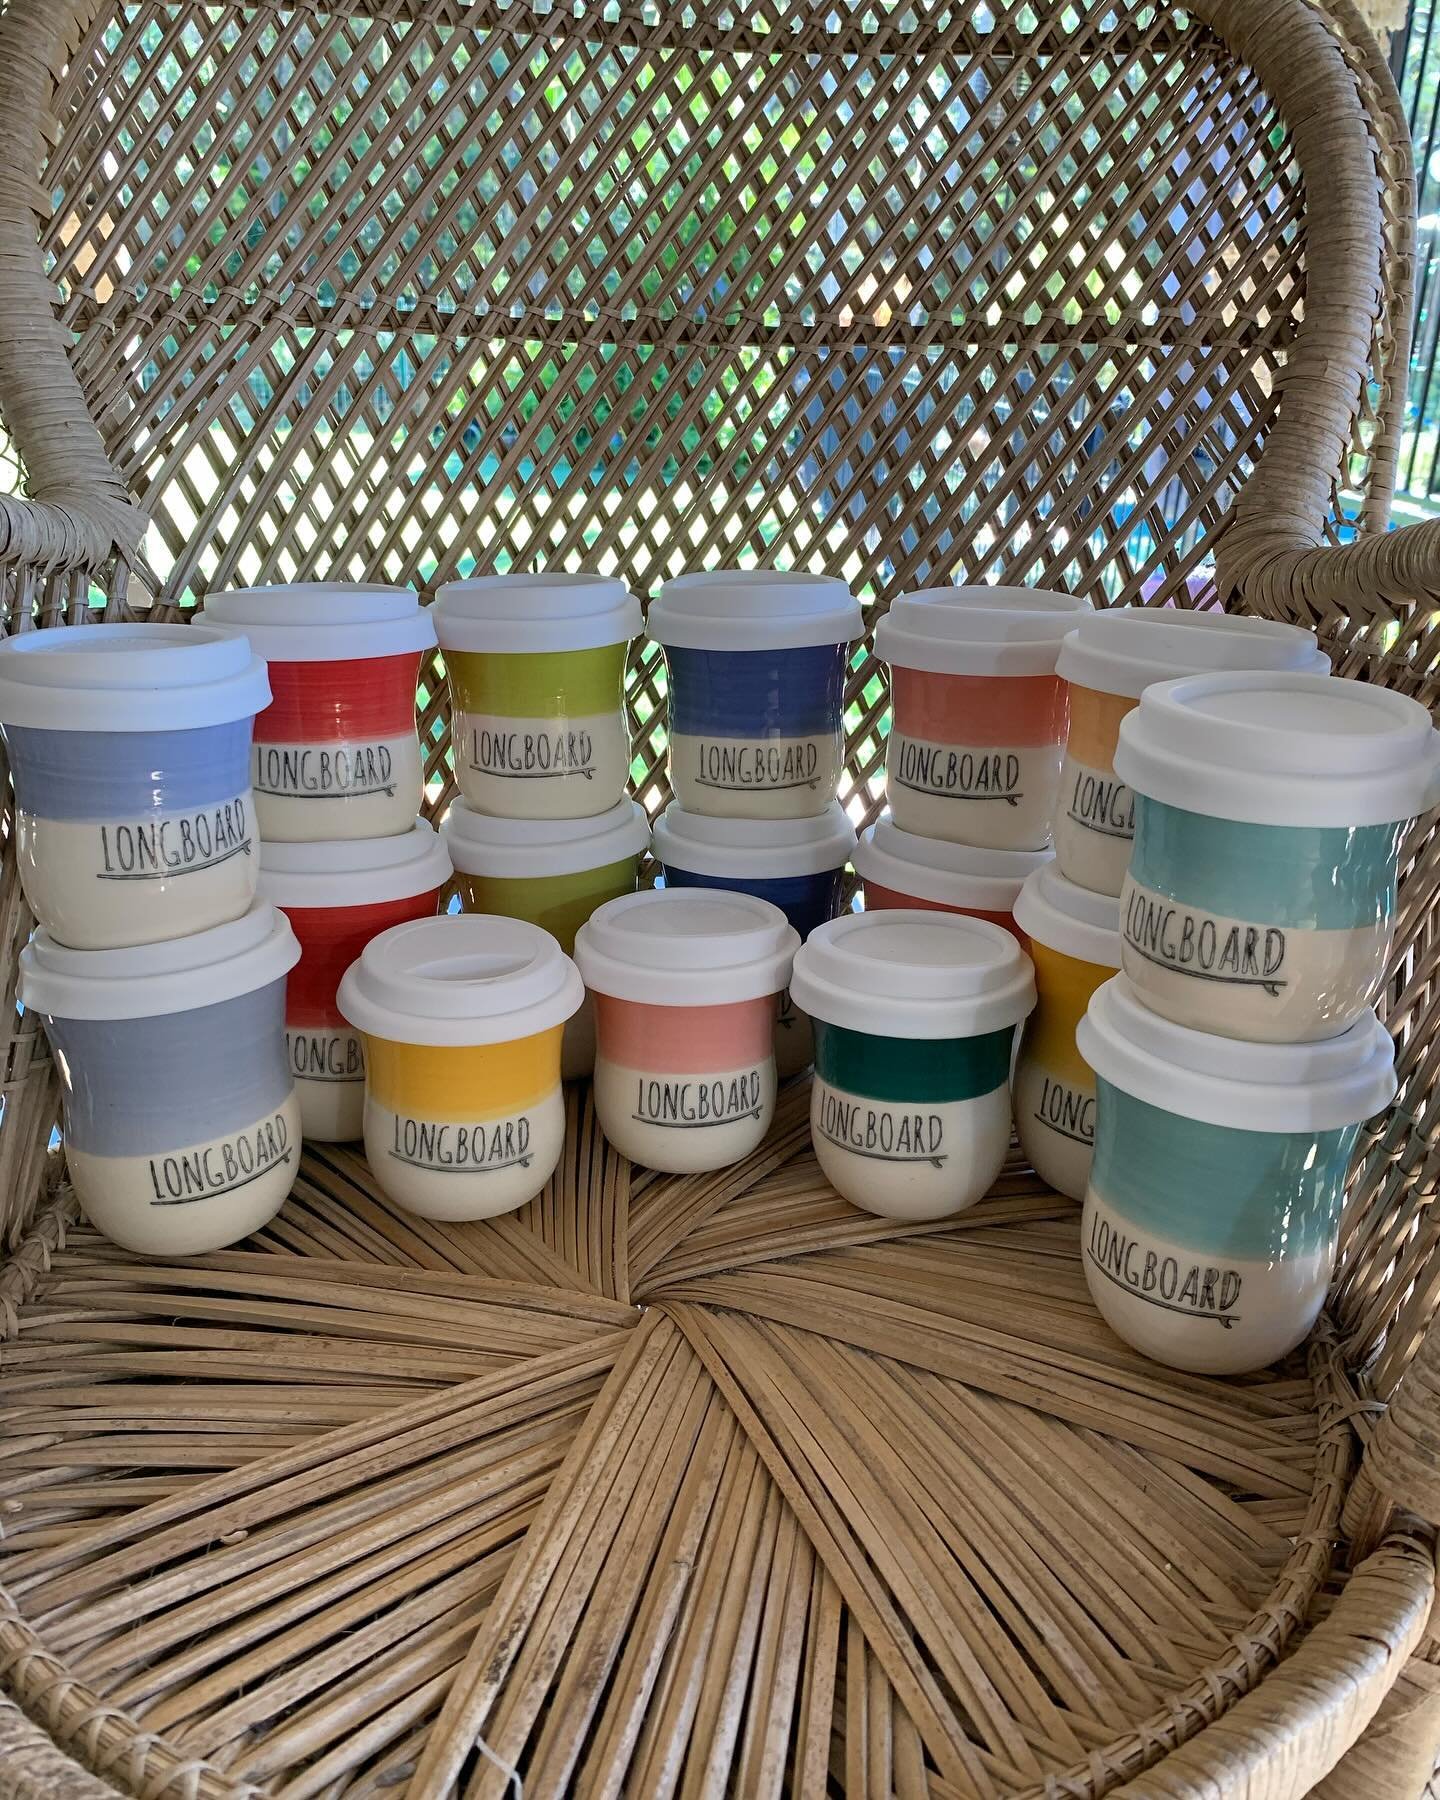 Just some of the new cups now available at our long time stockist @longboard.cafe on the beachfront in Woolongong! #theceramicmill #keepcup #travelcup #handmade #greenteam #sustainable #customtravelcup #travelmug #waronwaste #coffeebrisbane #coffesyd